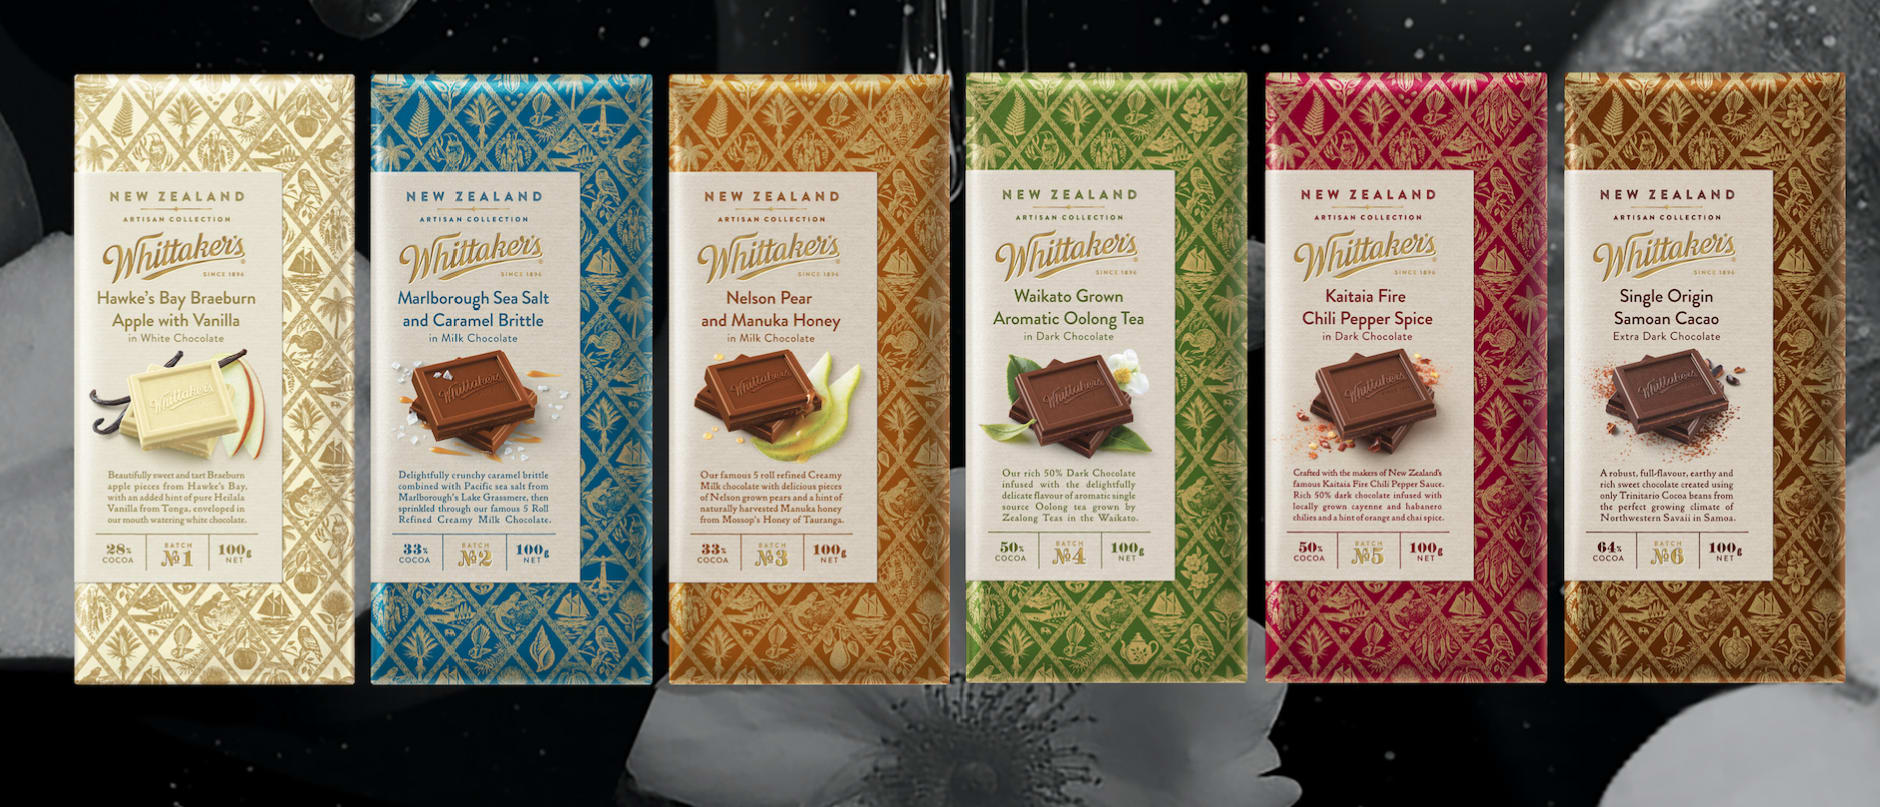 Where Does Chocolate Come From? - Whitakers Chocolates